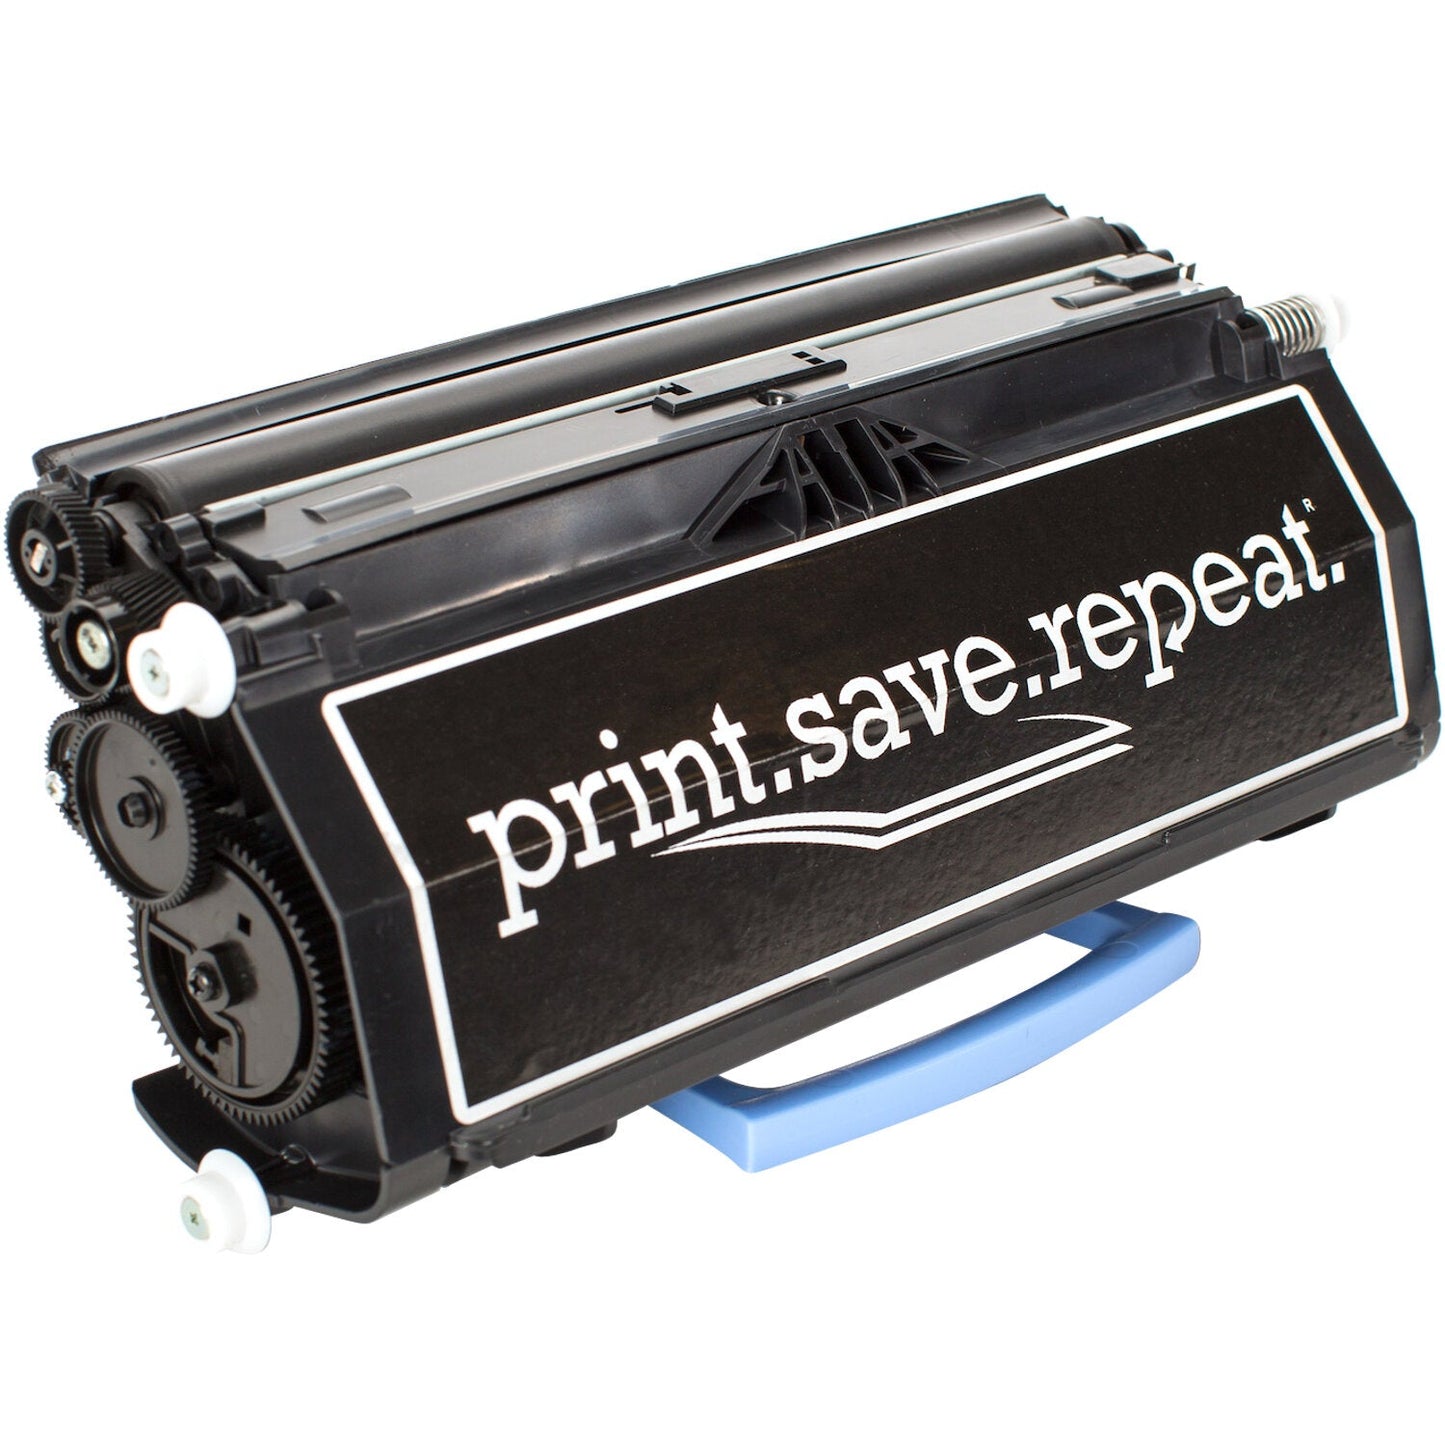 Print.Save.Repeat. Lexmark 24B2818 Extra High Yield Remanufactured Toner Cartridge for ES460 [15,000 Pages]